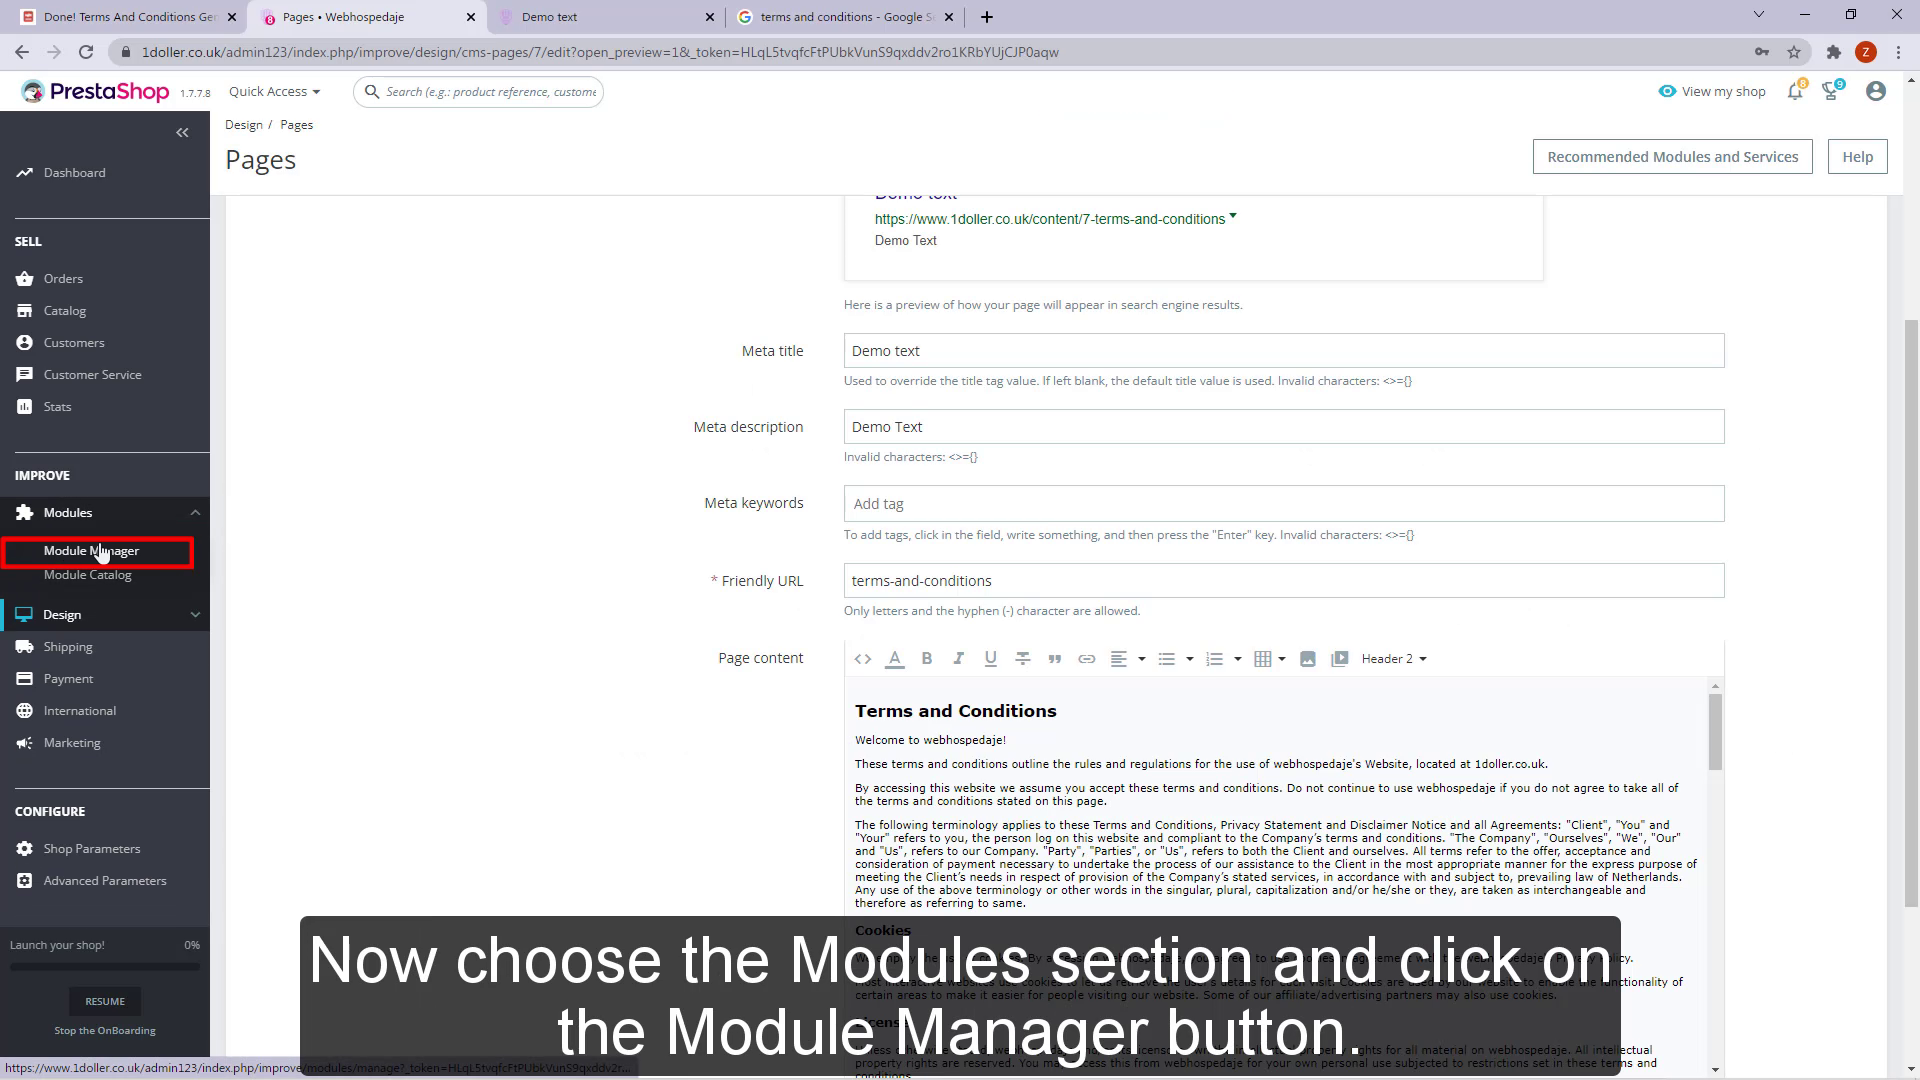 Now choose the Modules section and click on the Module Manager button